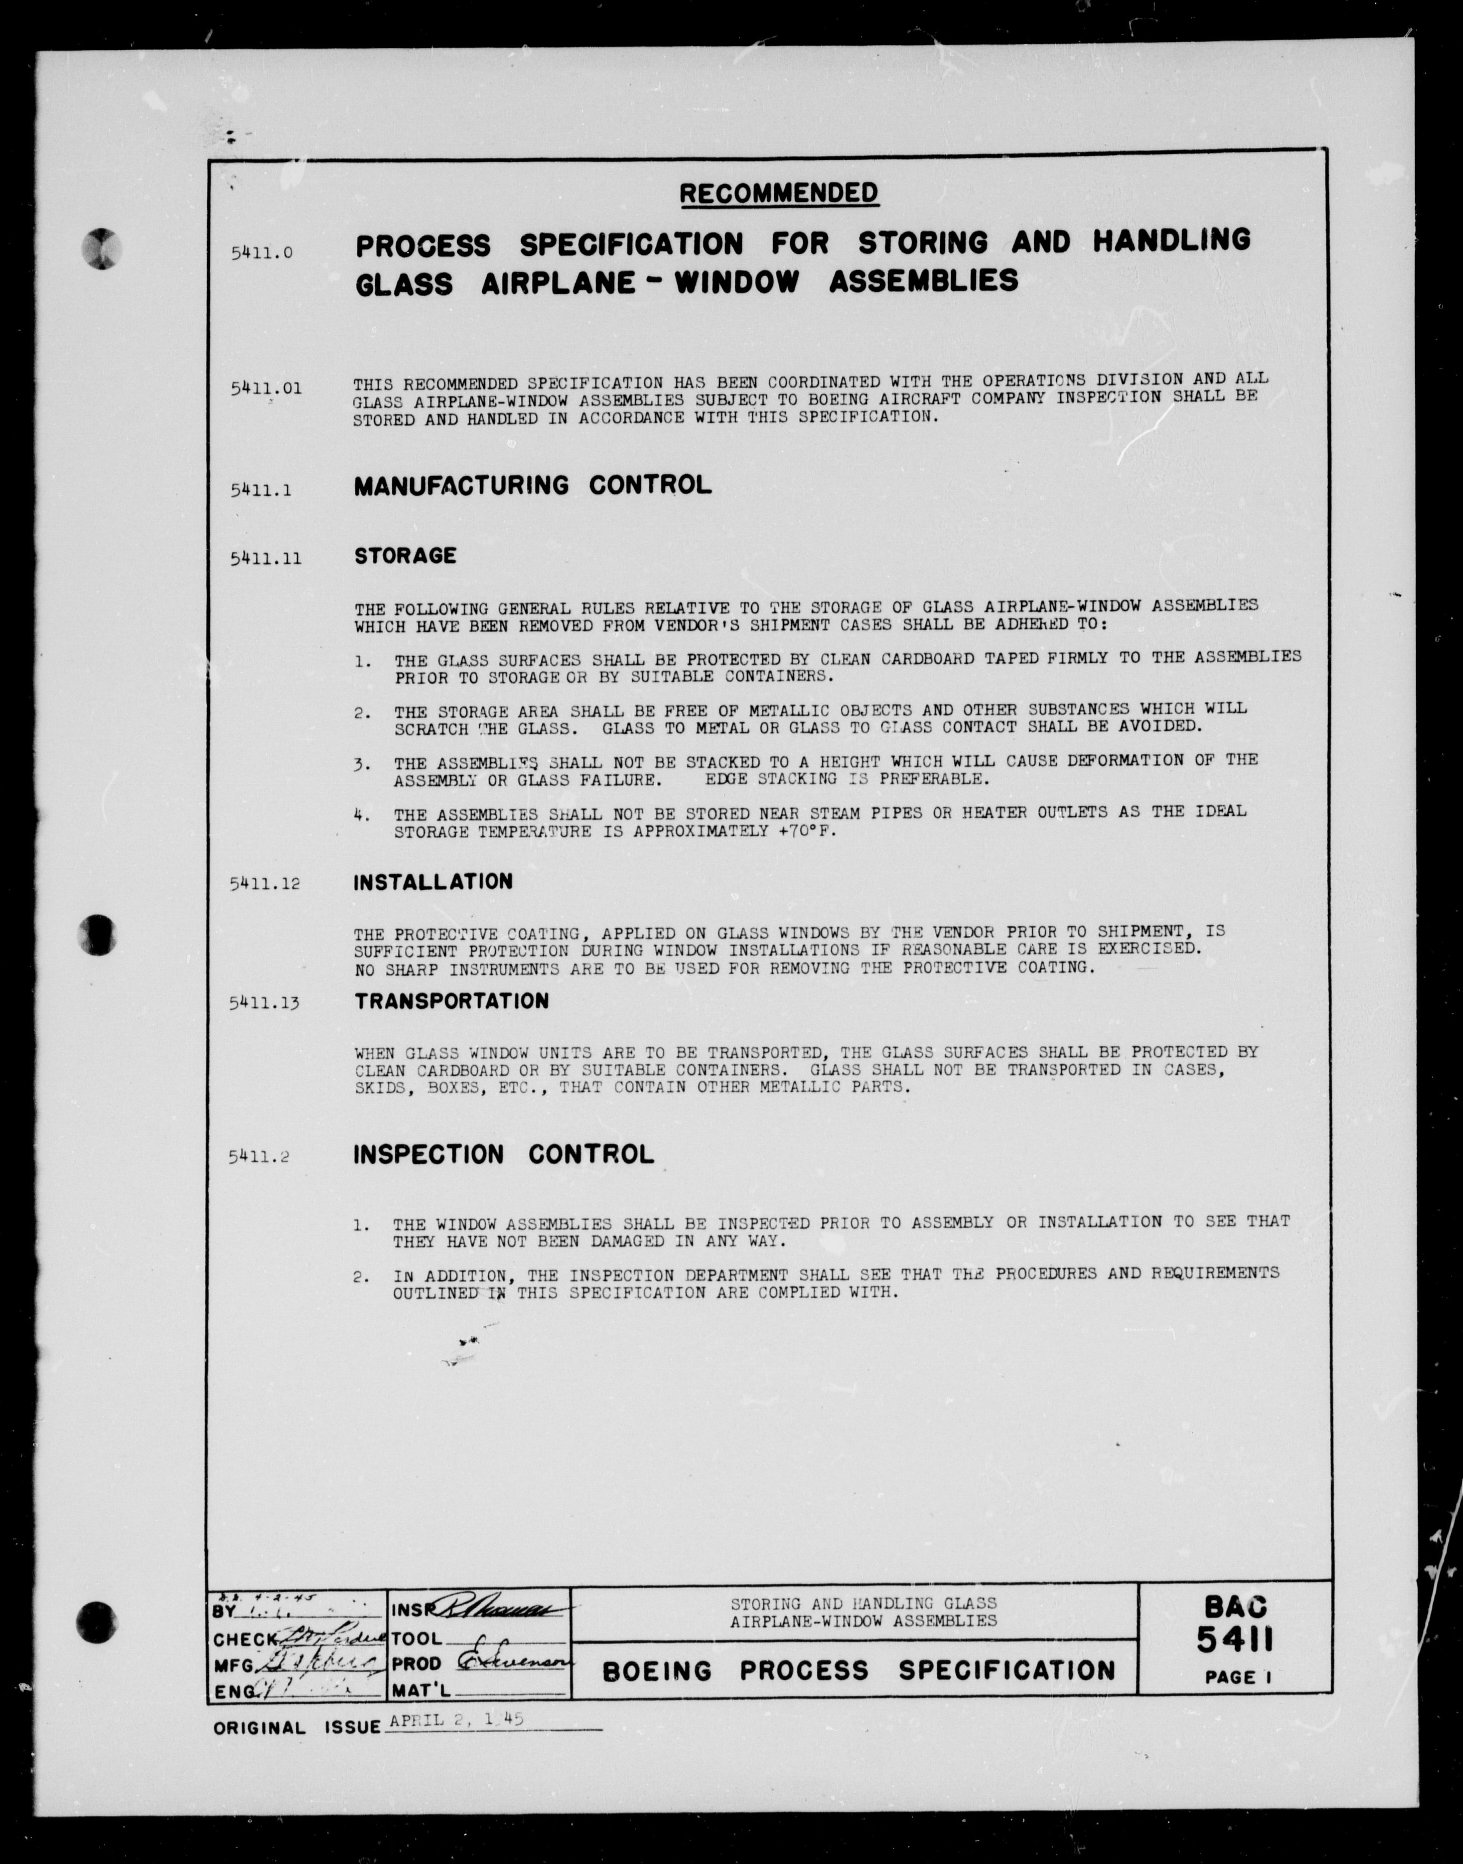 Sample page 1 from AirCorps Library document: Storing and Handling Glass Airplane Window Assemblies